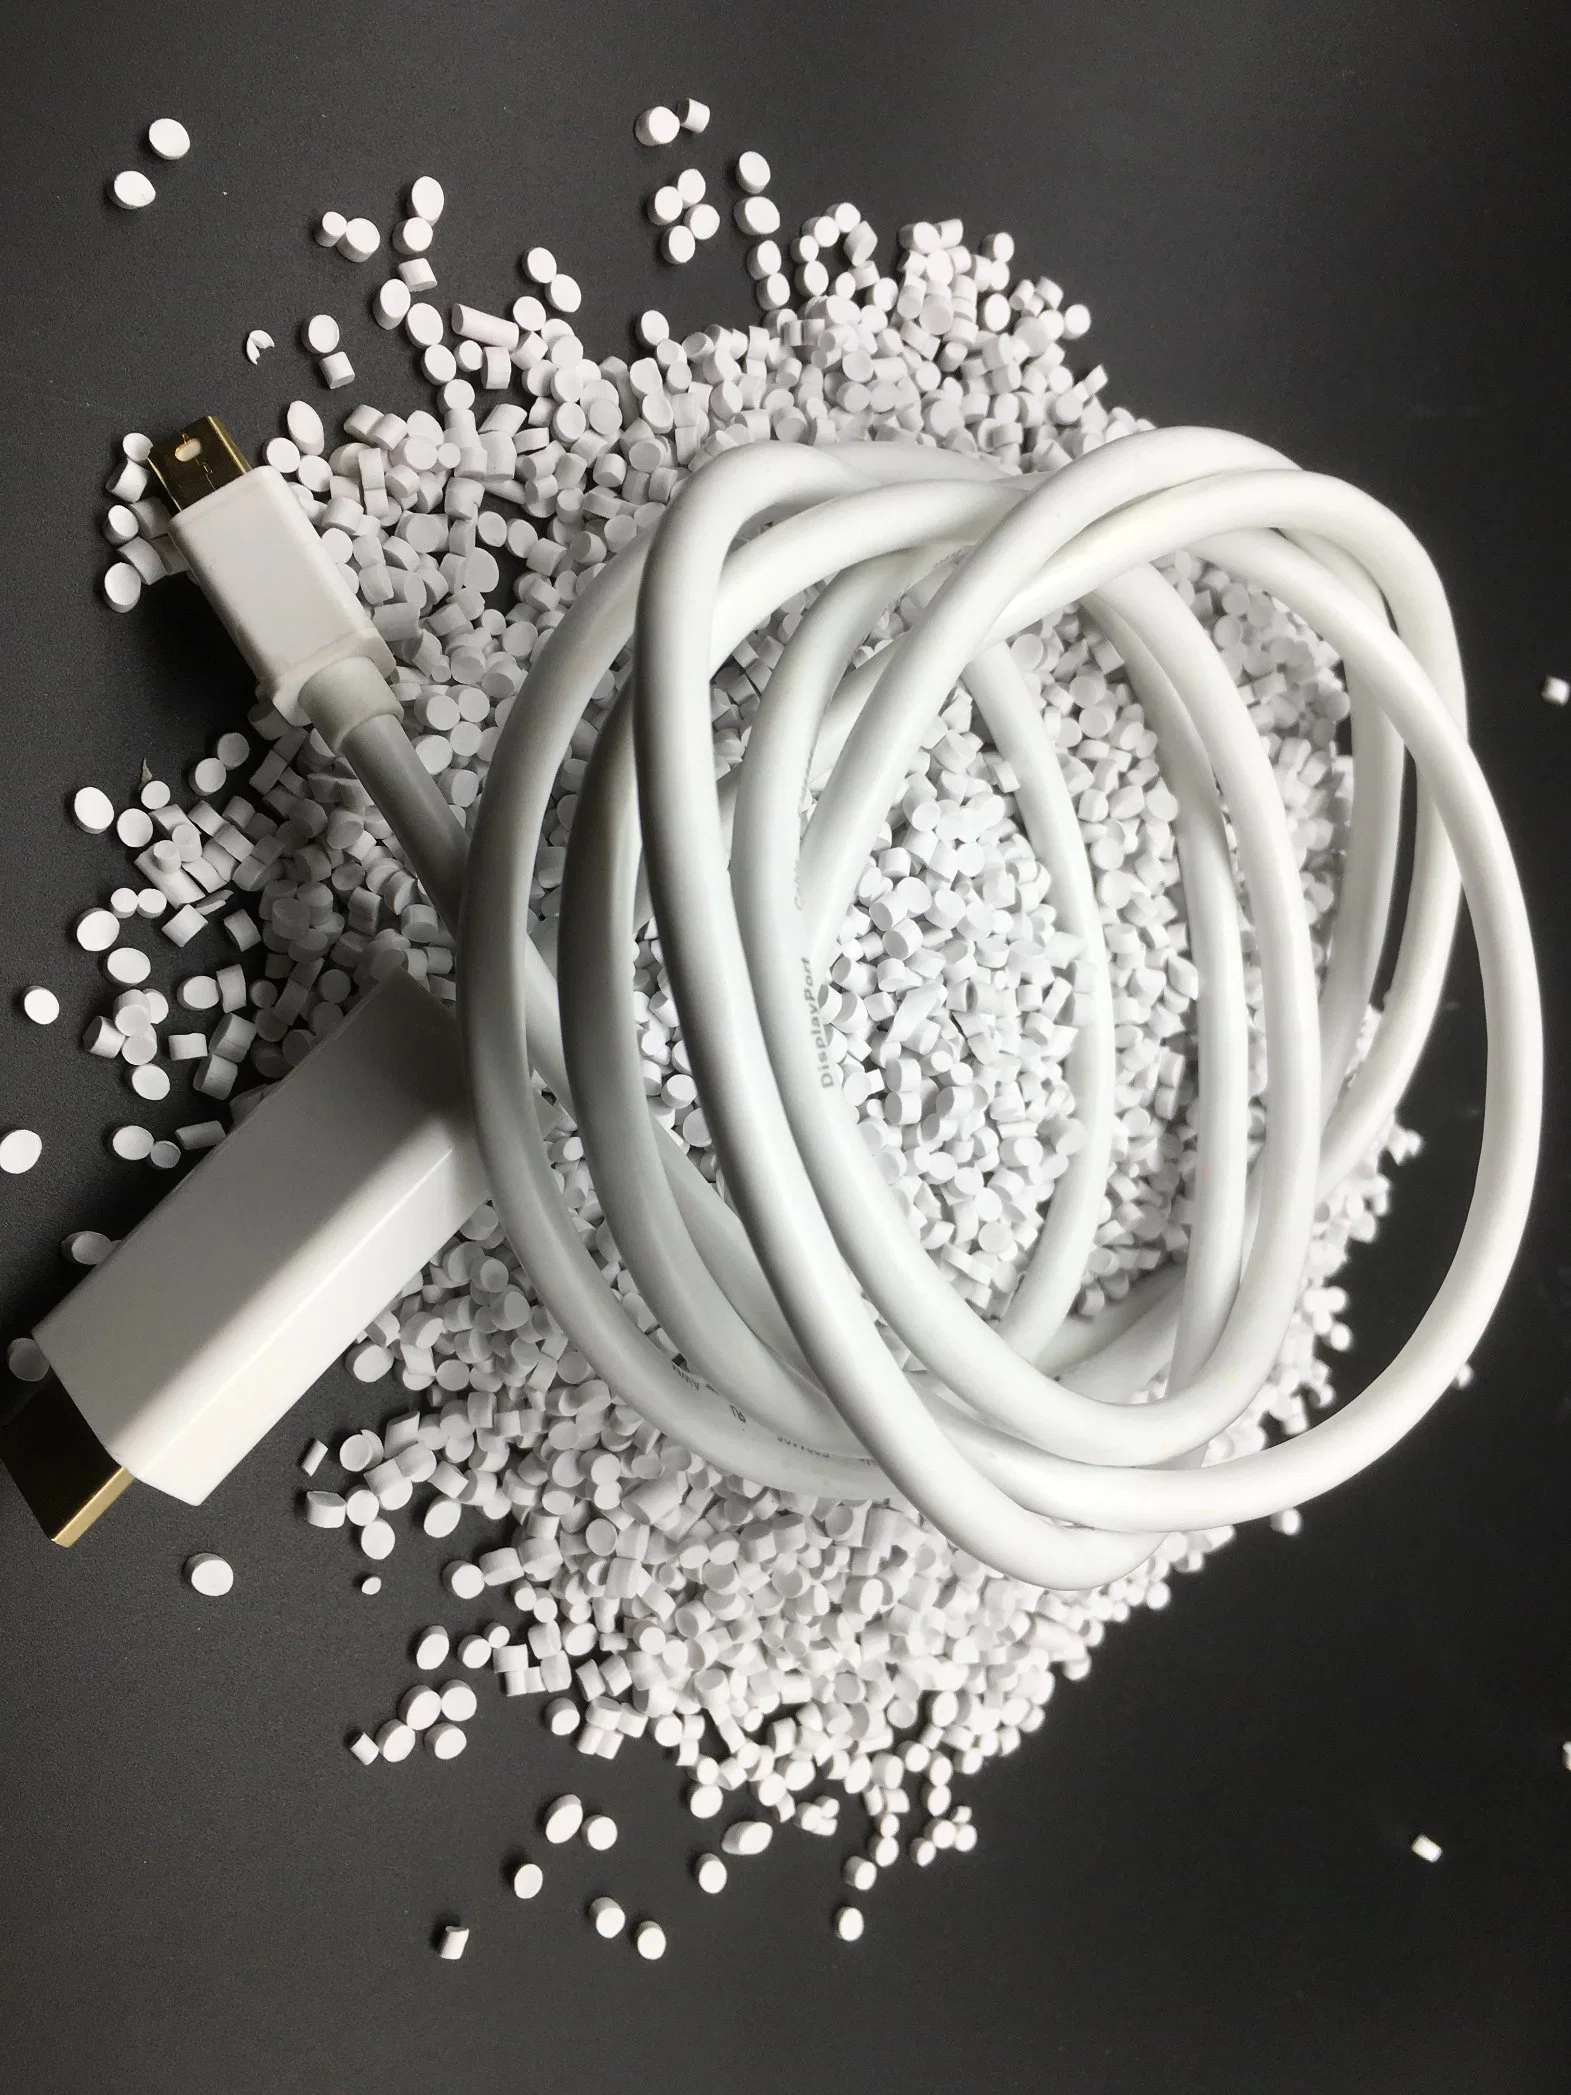 TPE Recycle Raw Material Recycled TPE Plastic Raw Material Flexible Soft White Recycled TPE Resin Raw Material for USB Data Cable Wire Plug Material